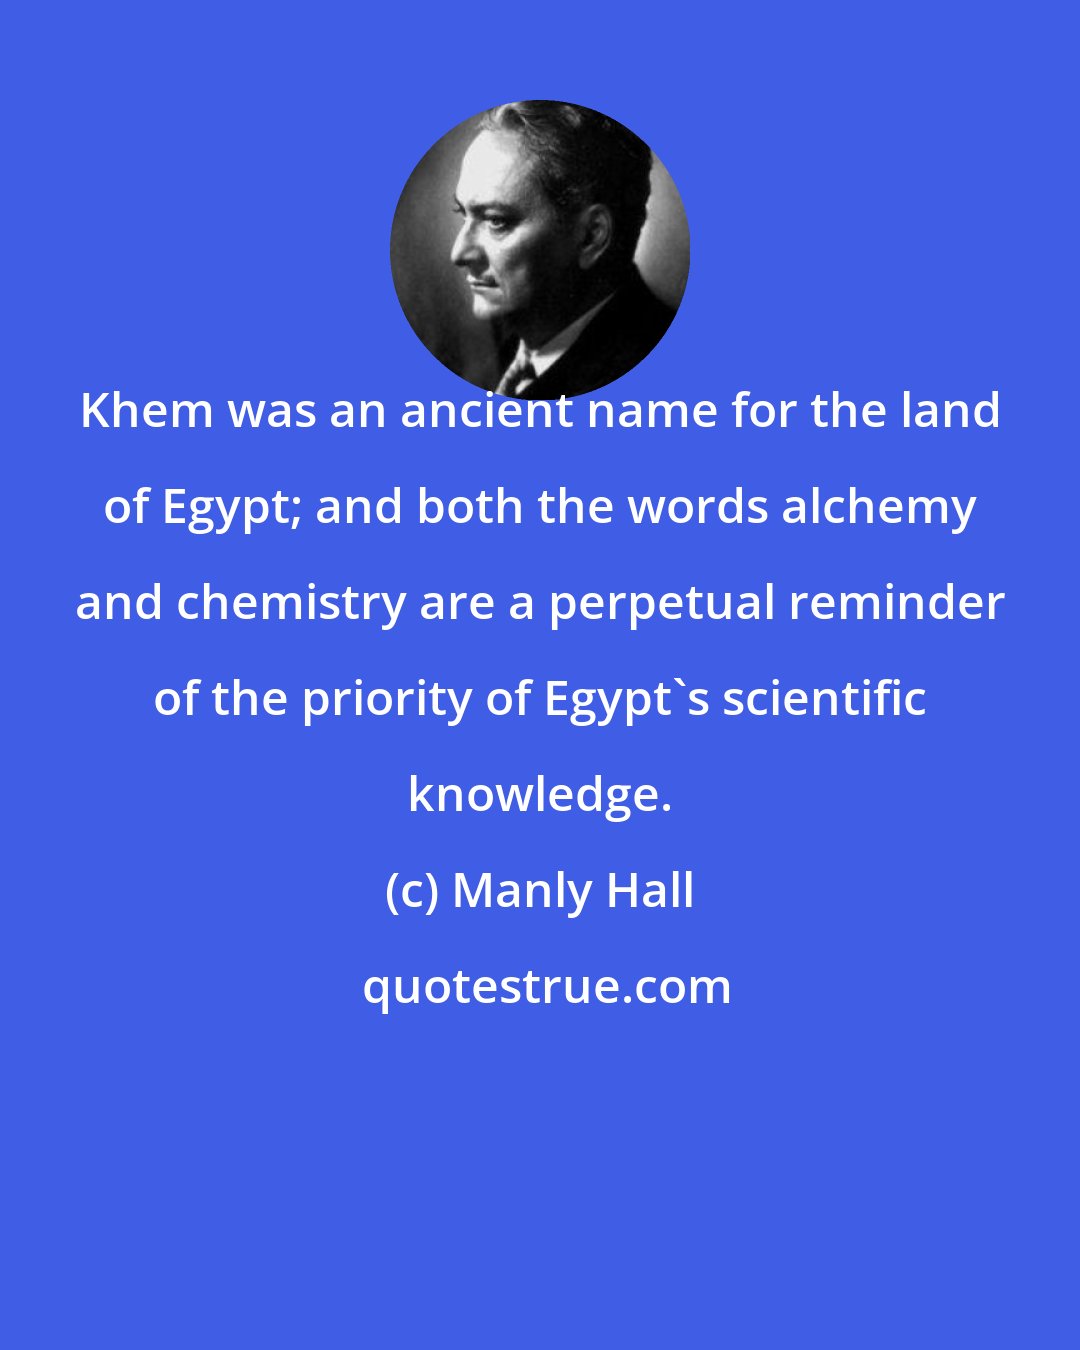 Manly Hall: Khem was an ancient name for the land of Egypt; and both the words alchemy and chemistry are a perpetual reminder of the priority of Egypt's scientific knowledge.